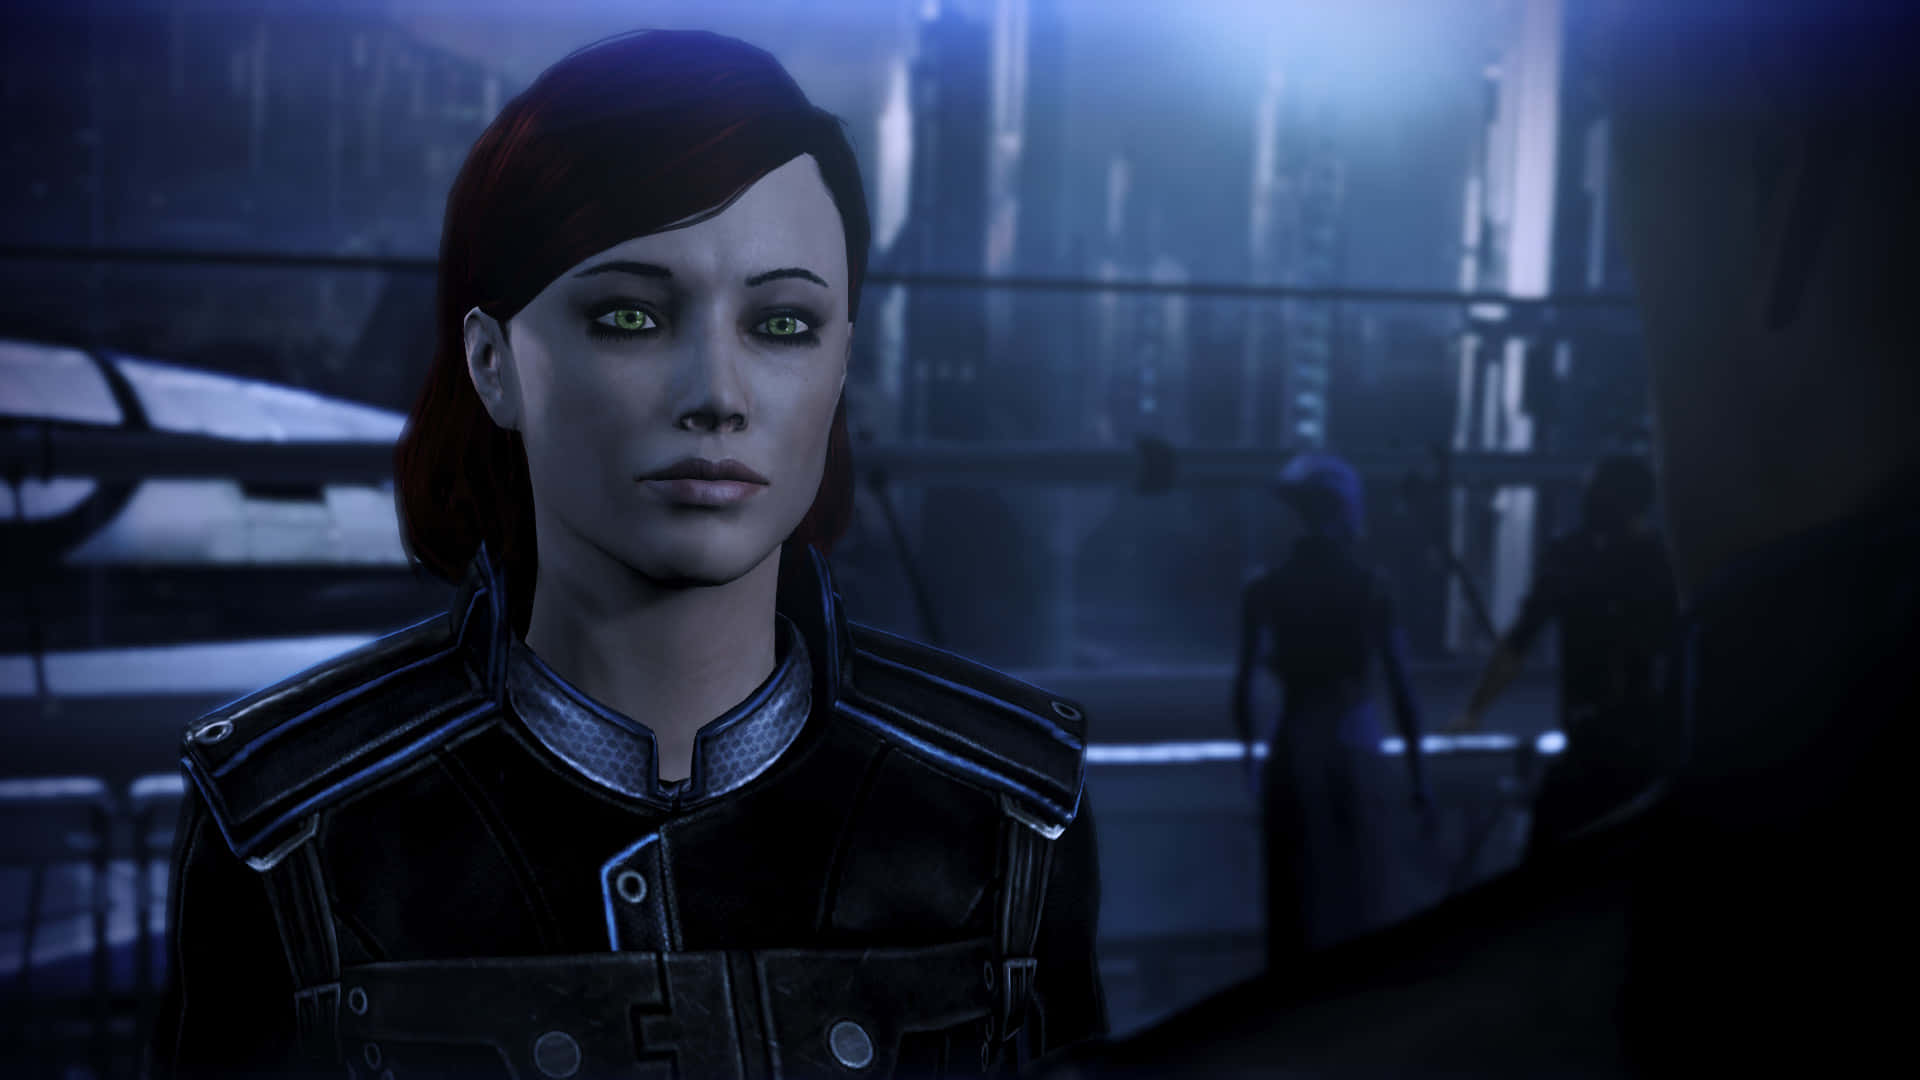 Commander Femshep from Mass Effect in a dramatic action pose Wallpaper